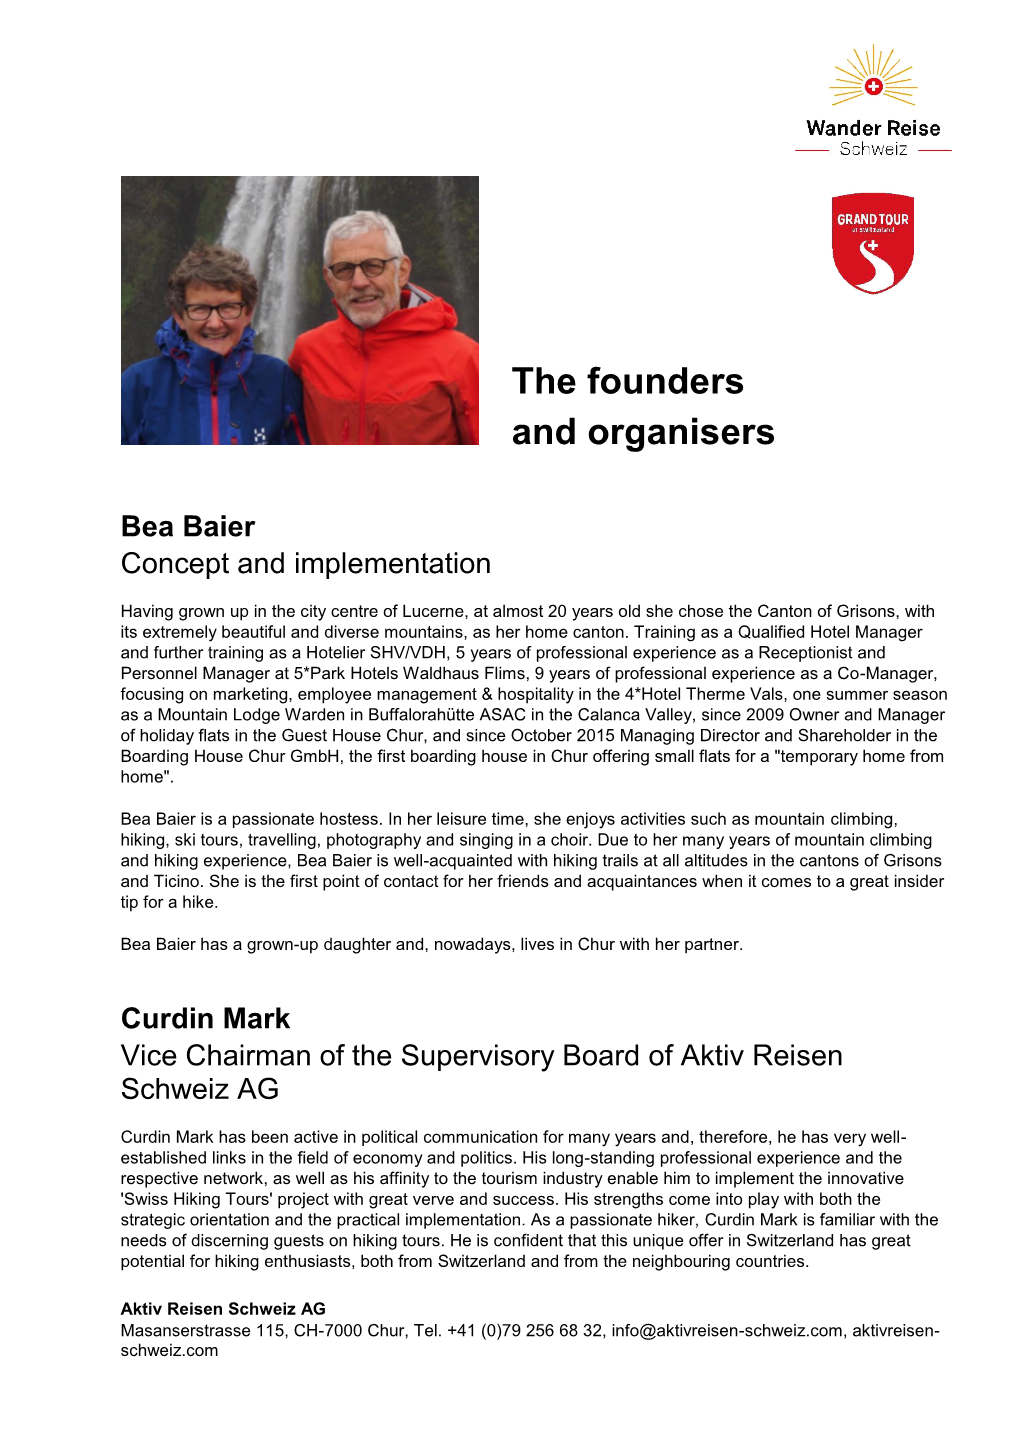 The Founders and Organisers